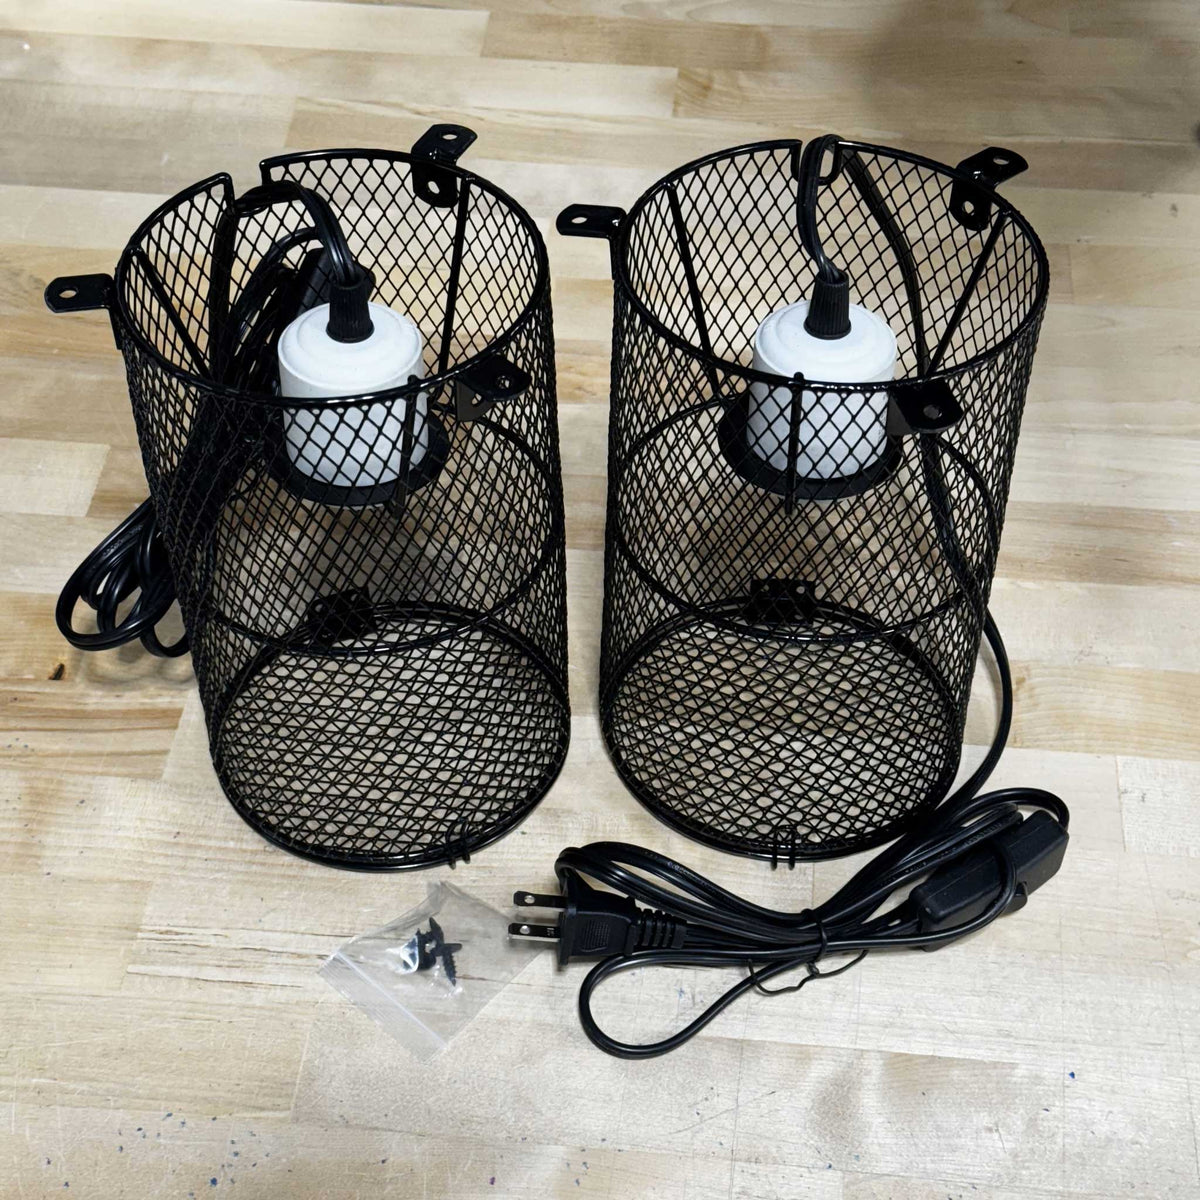 2-Pack Heat Lamp Fixtures with Integrated Safety Baskets | Medium